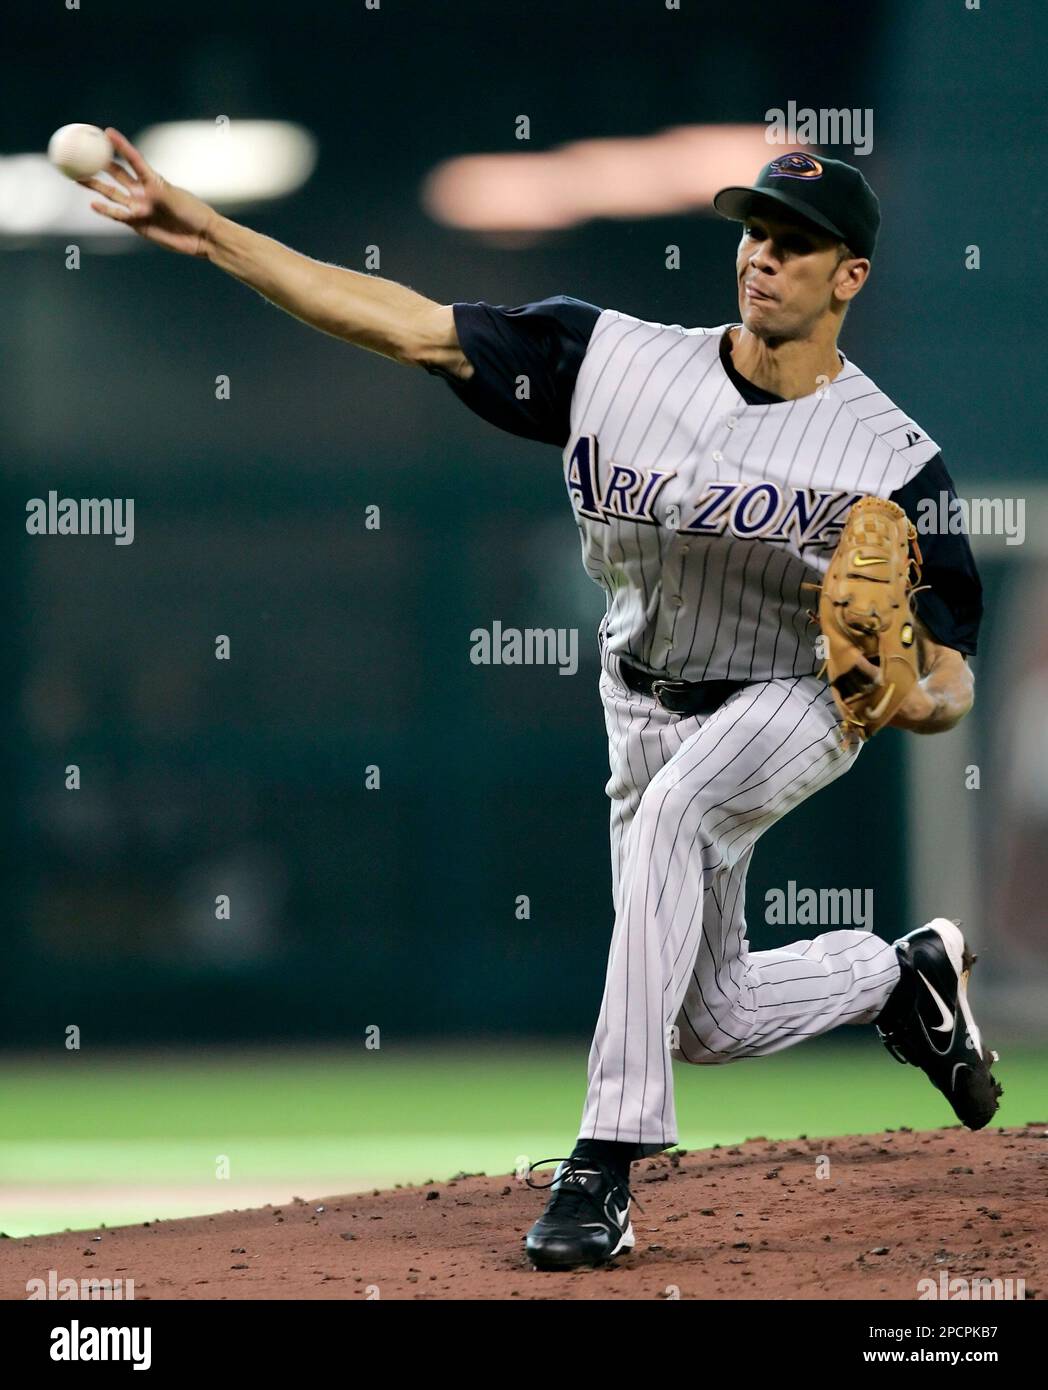 Arizona Diamondbacks pitcher Juan Cruz delivers a pitch against the Houston  Astros during the first inning of their Major League Baseball game  Saturday, July 29, 2006, in Houston. (AP Photo/David J. Phillip